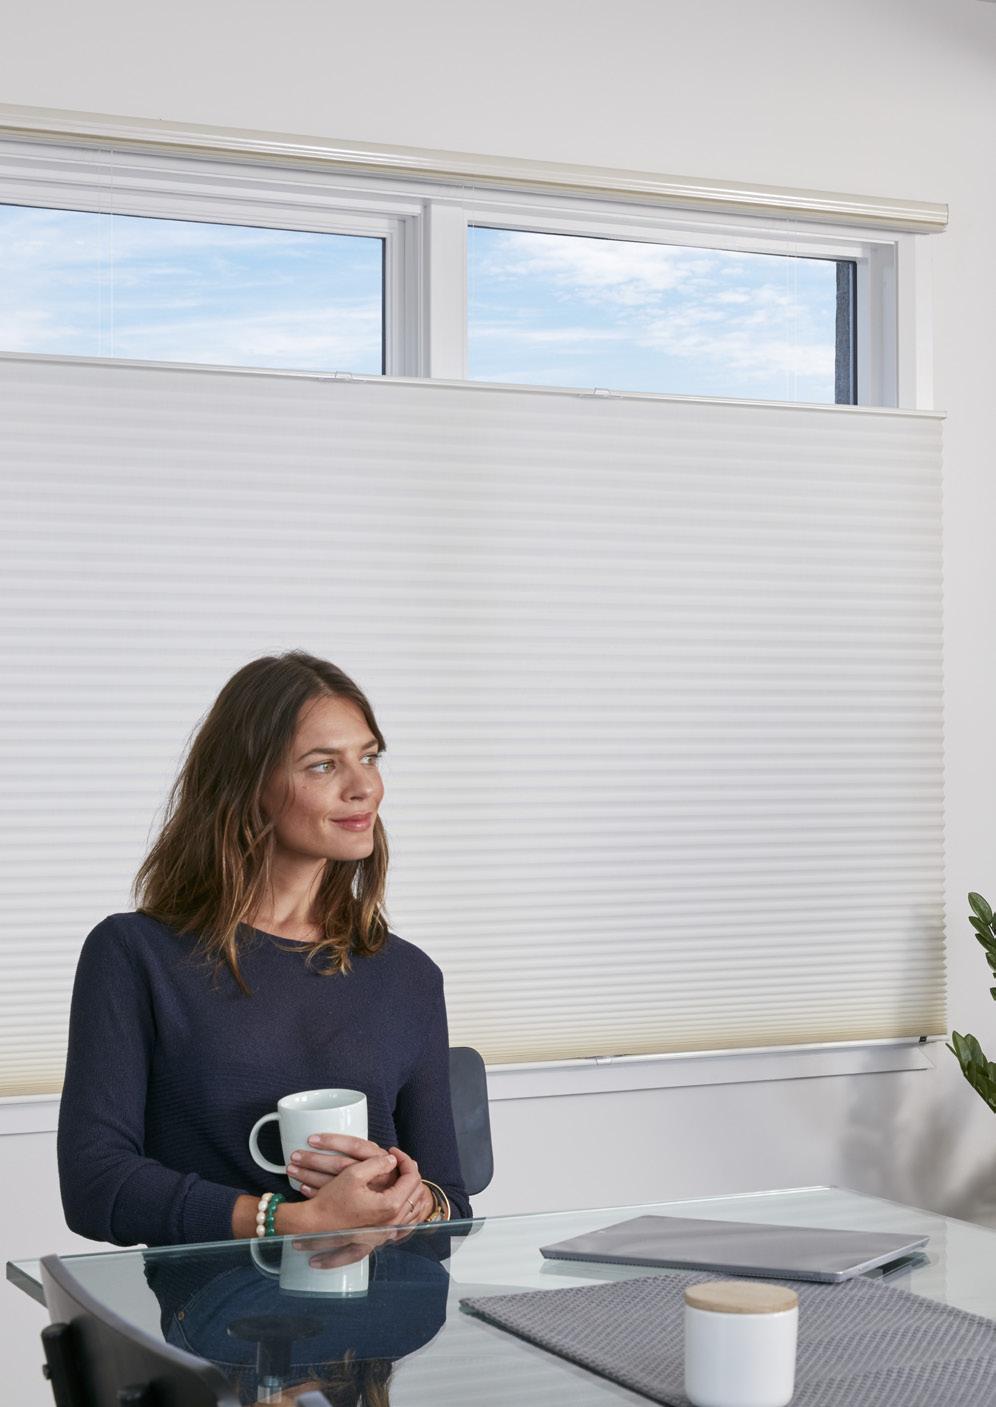 Luxaflex Duette Shades Duette Shades are made of anti-static, dust-resistant fabric which repels dirt and dust. For most Duette fabrics, the following cleaning options are available.